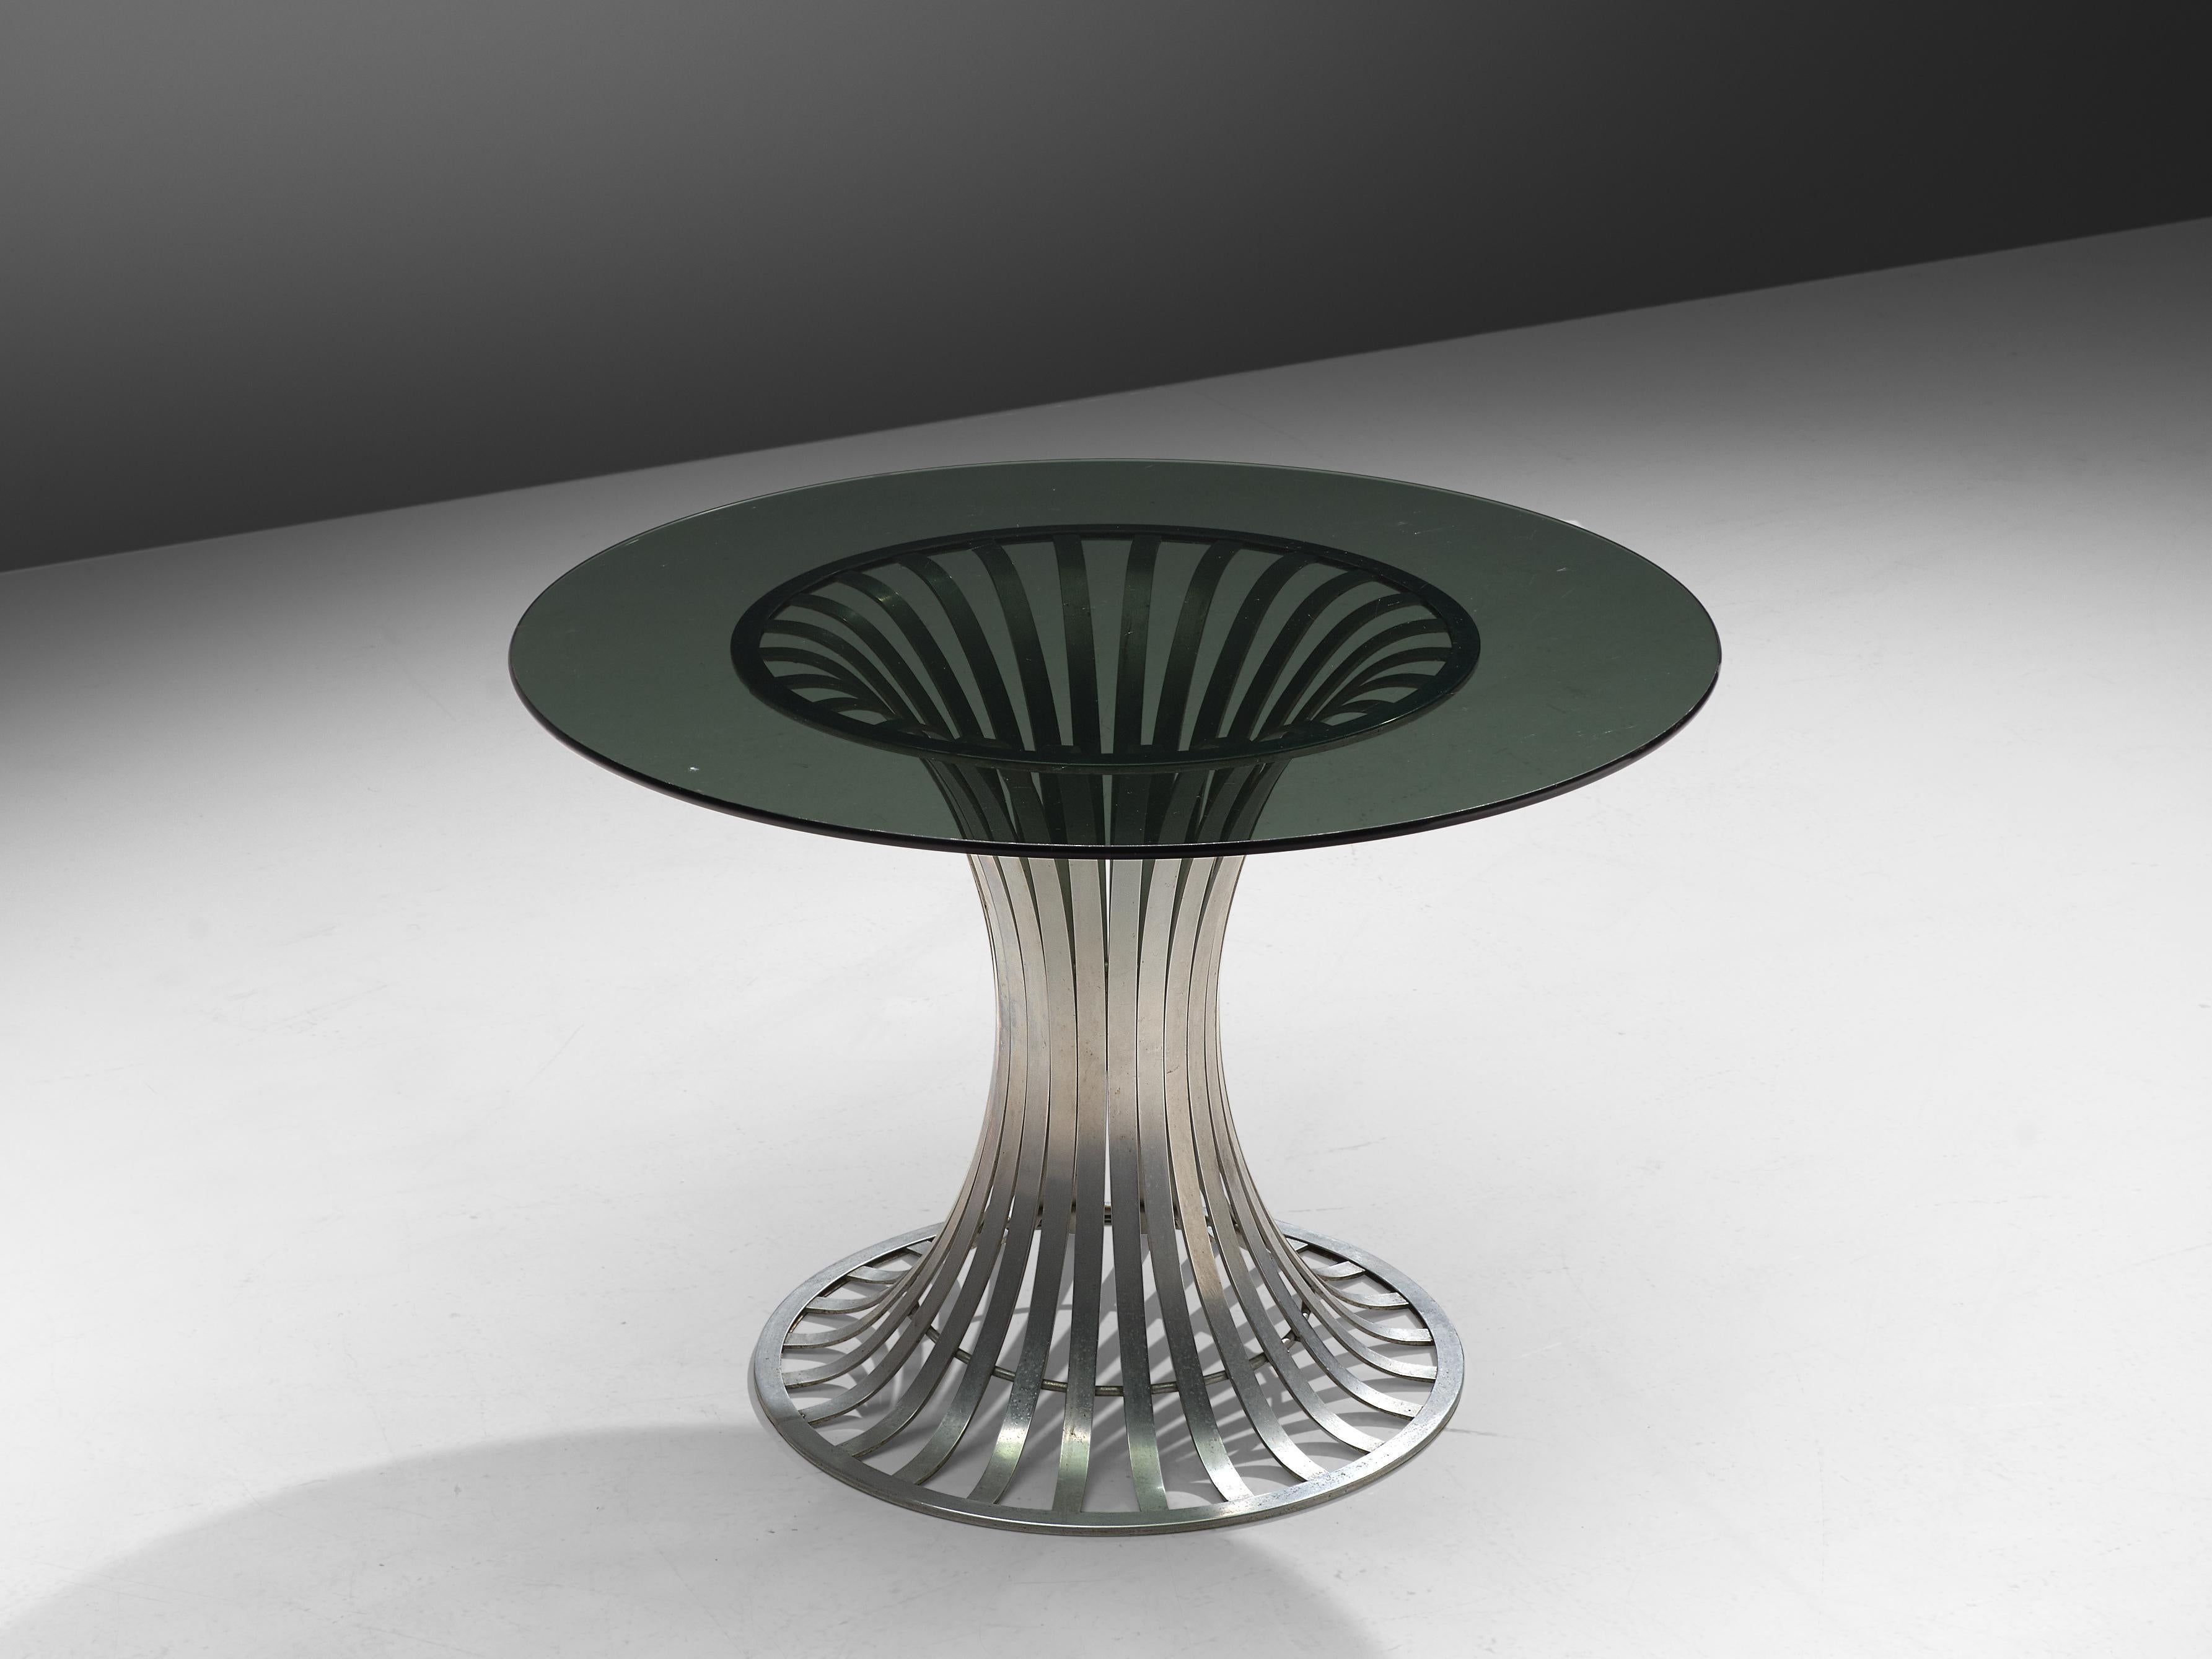 Herbert Saiger for Woodard, round dining table, aluminum, glass, United States, 1960s

Originally designed as outdoor furniture, this smooth dining or centre table by Herbert Saiger fits an indoor setting as well. The round table top is executed in